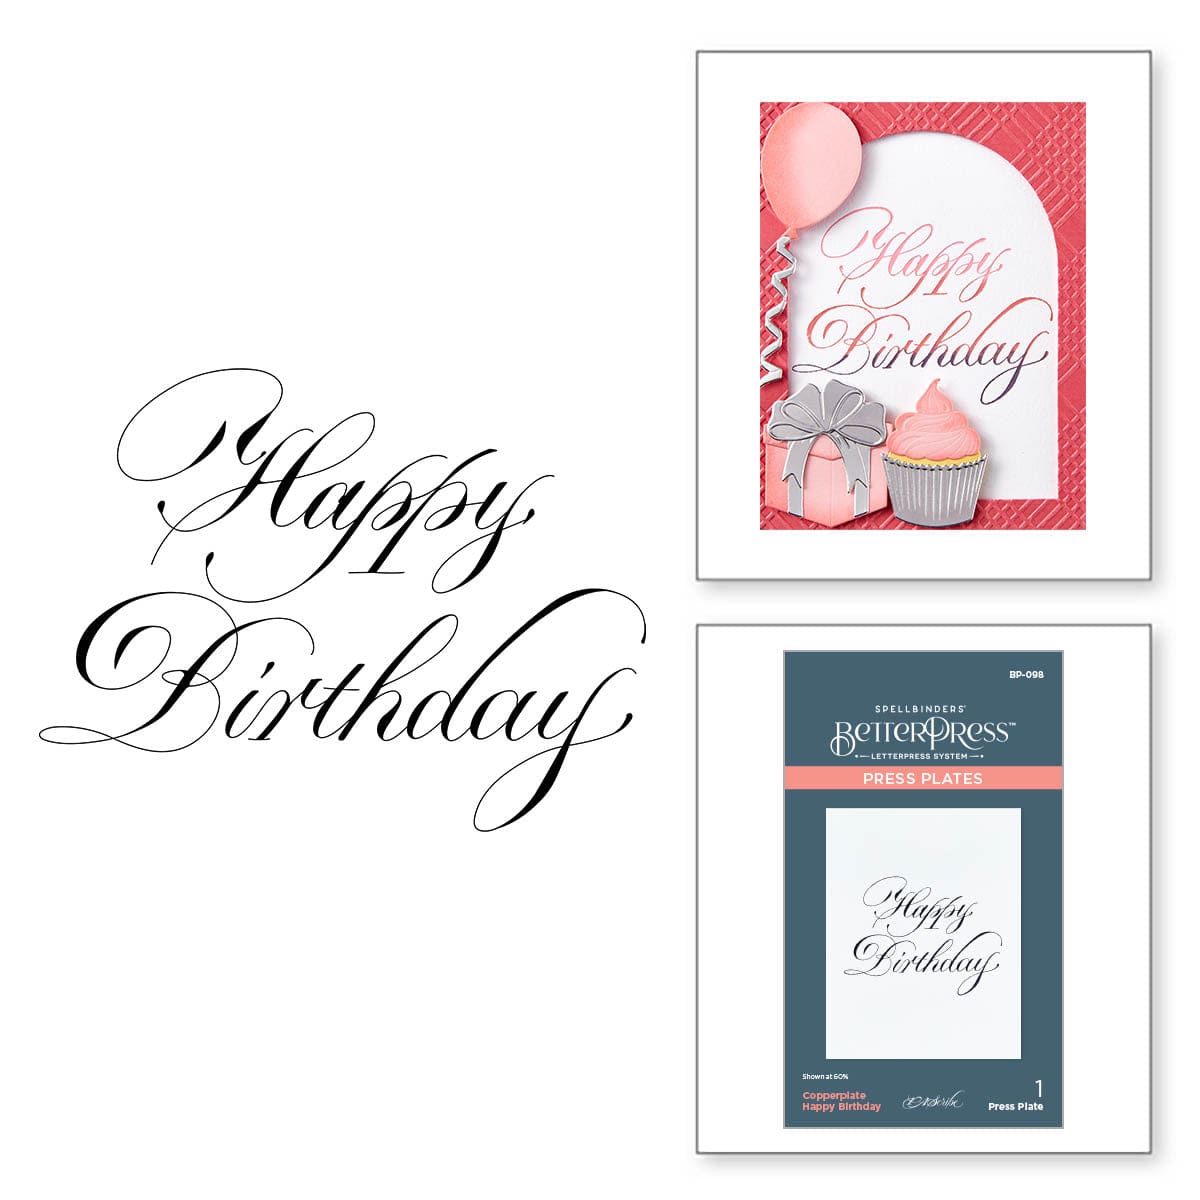 Image of Copperplate Happy Birthday Press Plate from the Copperplate Everyday Sentiments Collection by Paul Antonio